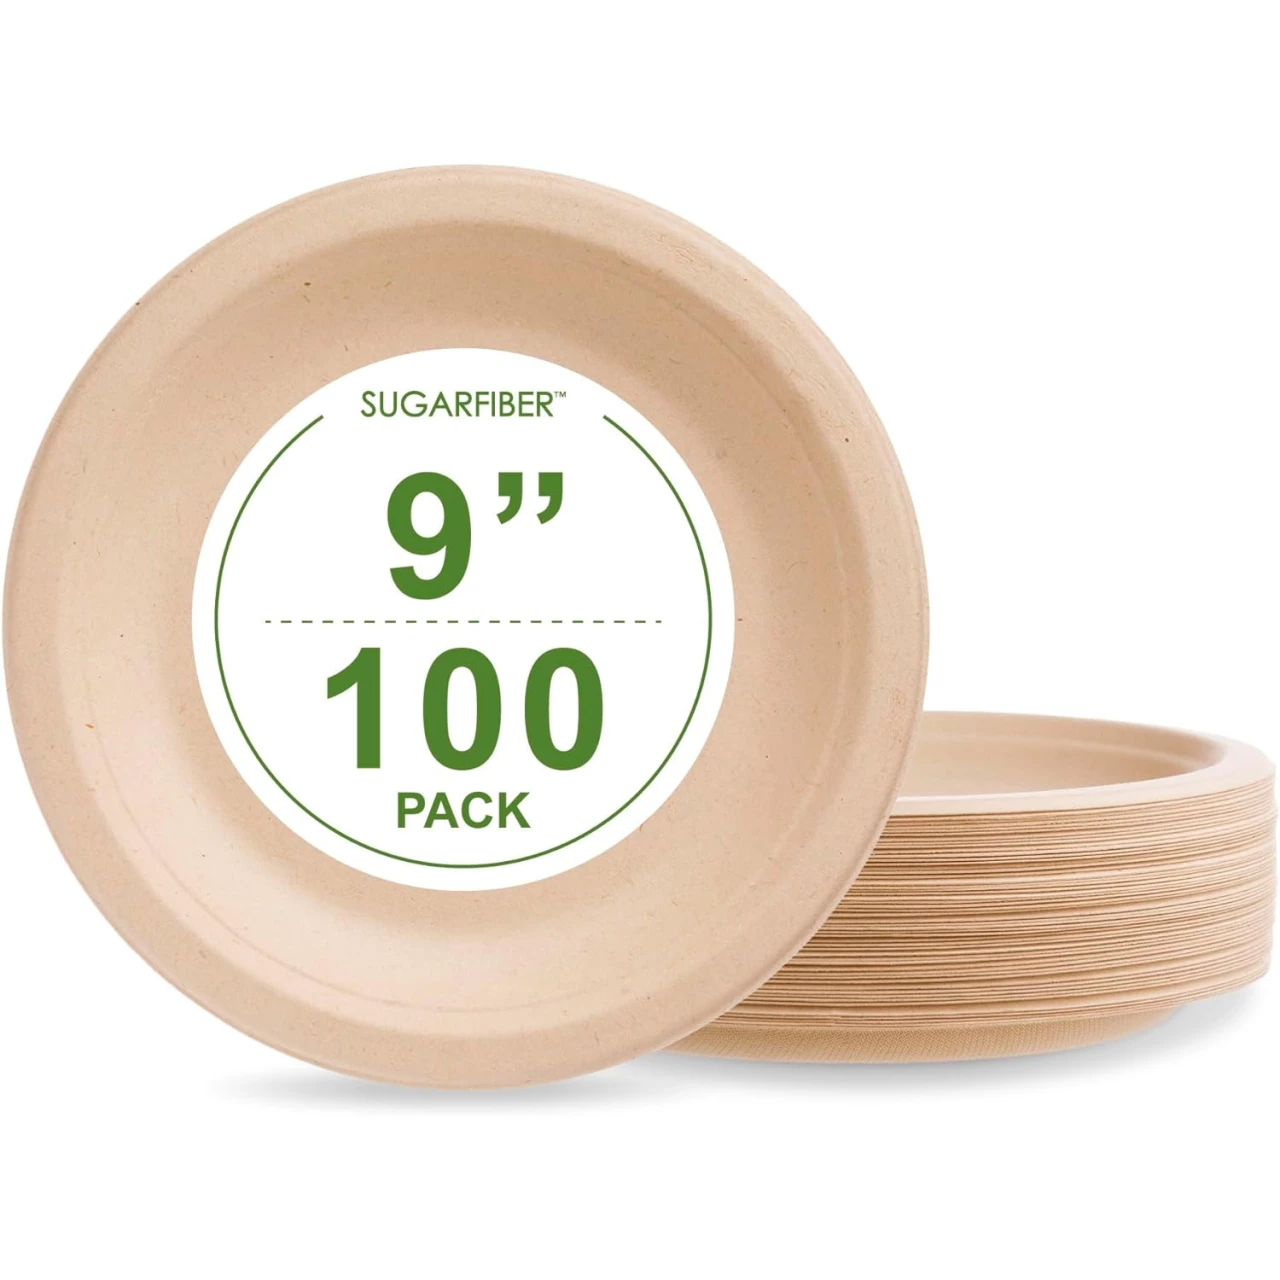 Harvest Pack GOURMET SHOWCASE 100 COUNT Sugarfiber 9-inch Round Disposable Compostable Paper Plates, Natural Bagasse Biodegradable Plate, Made From Eco-Friendly Plant Fibers